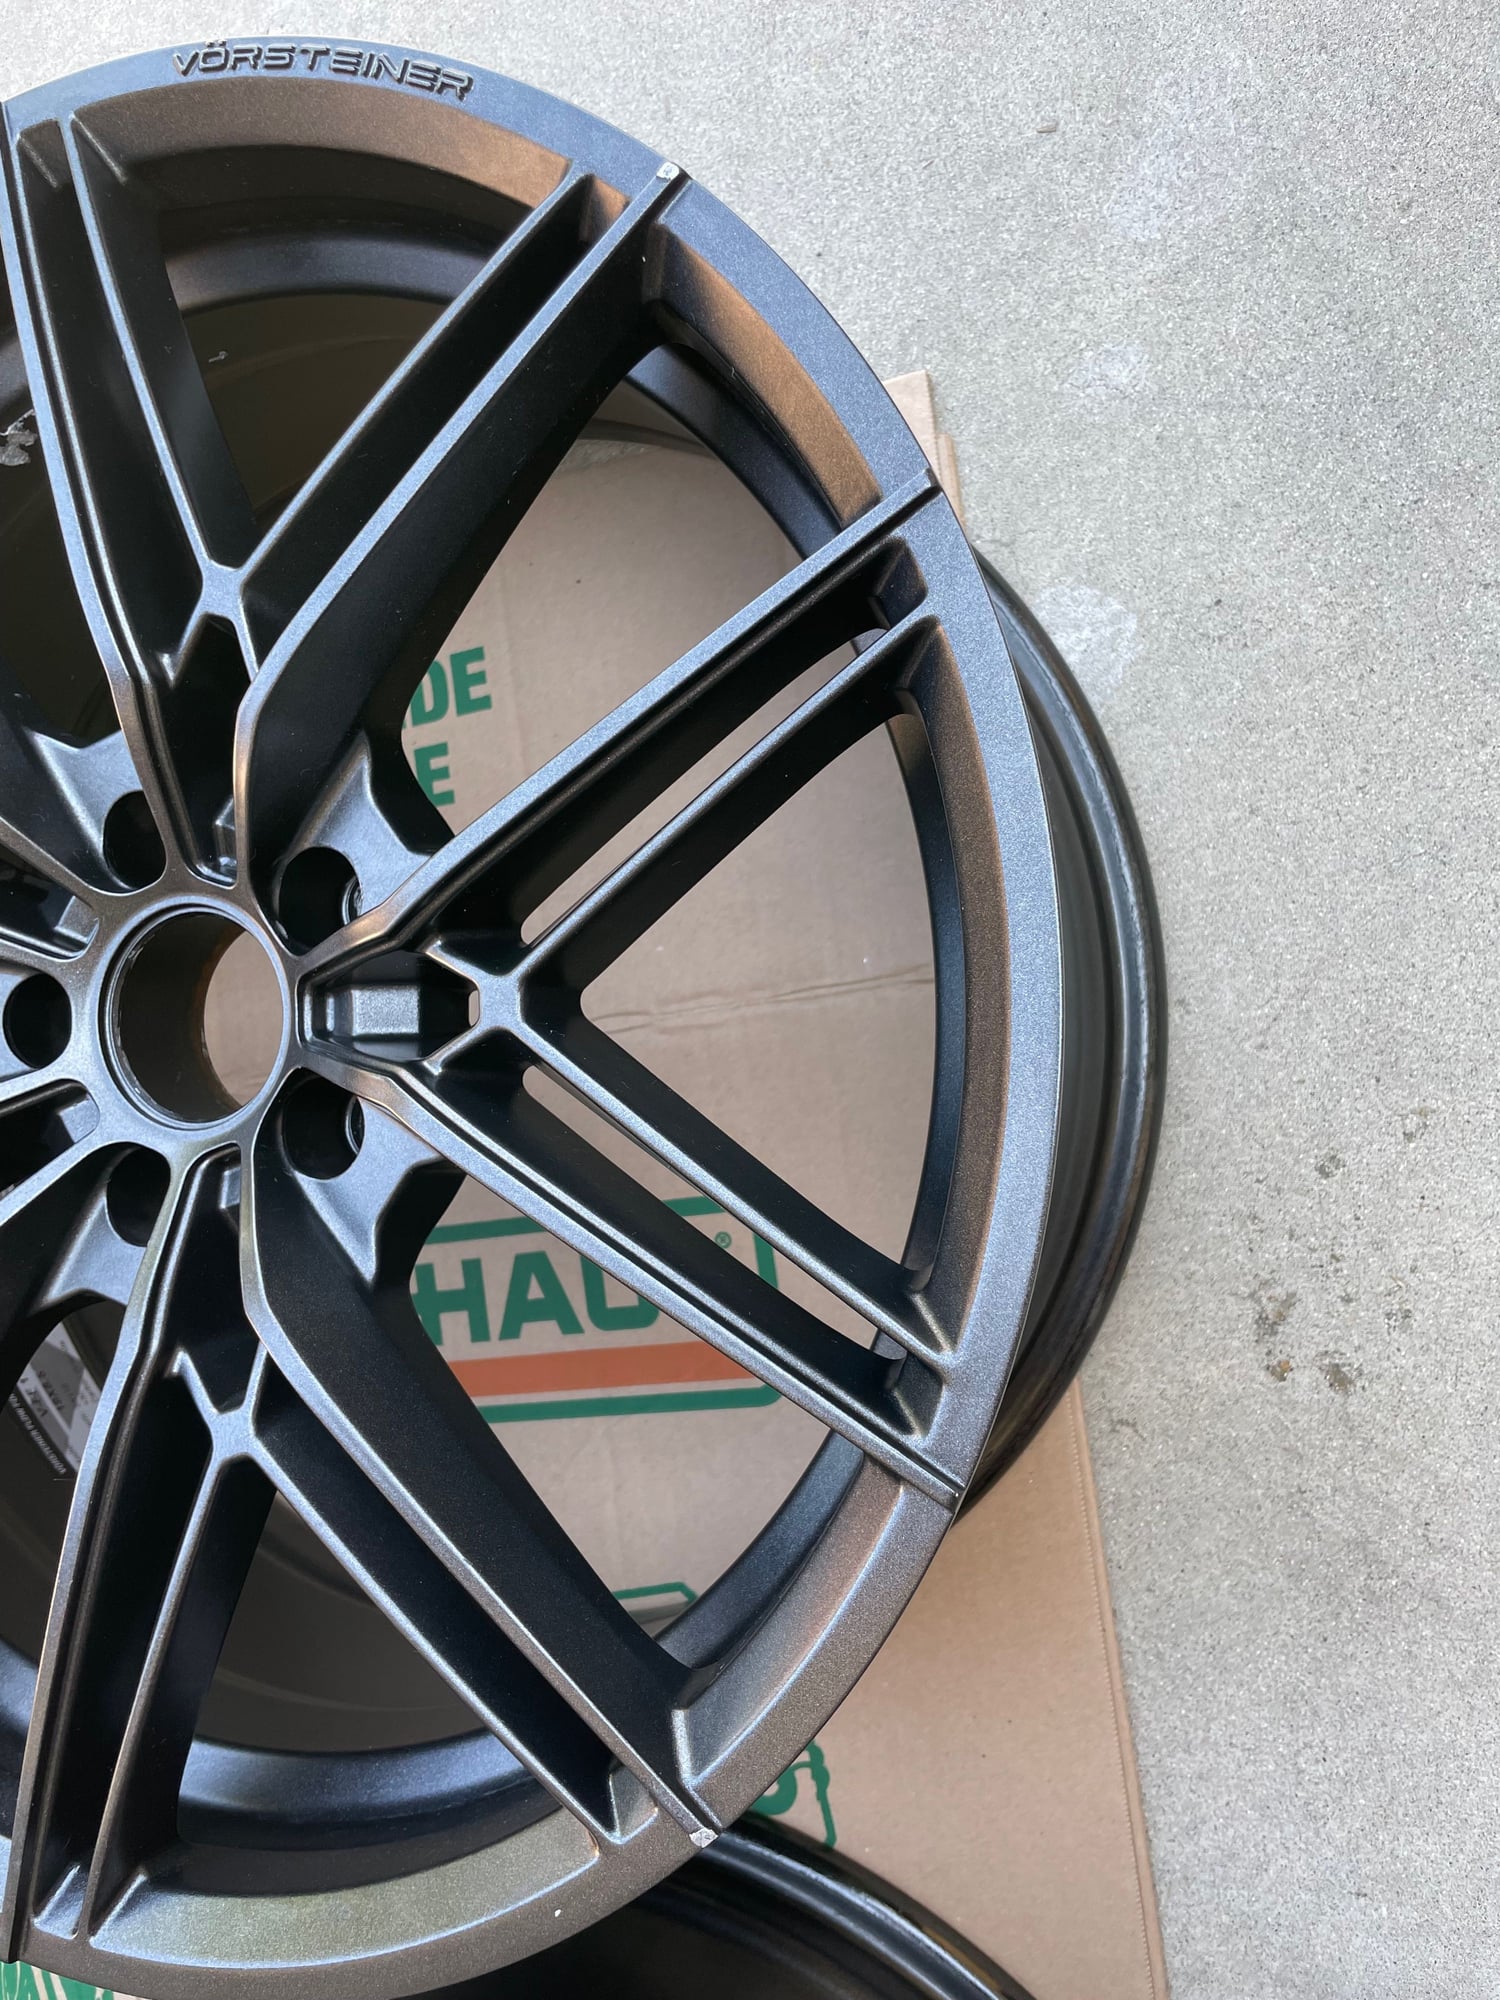 Wheels and Tires/Axles - FS: Vorsteiner V-FF 112 Carbon Graphite Wheel Set (staggered) w/ TPMS (off a 2017 C43 - Used - 2017 to 2020 Mercedes-Benz C43 AMG - San Diego, CA 92127, United States